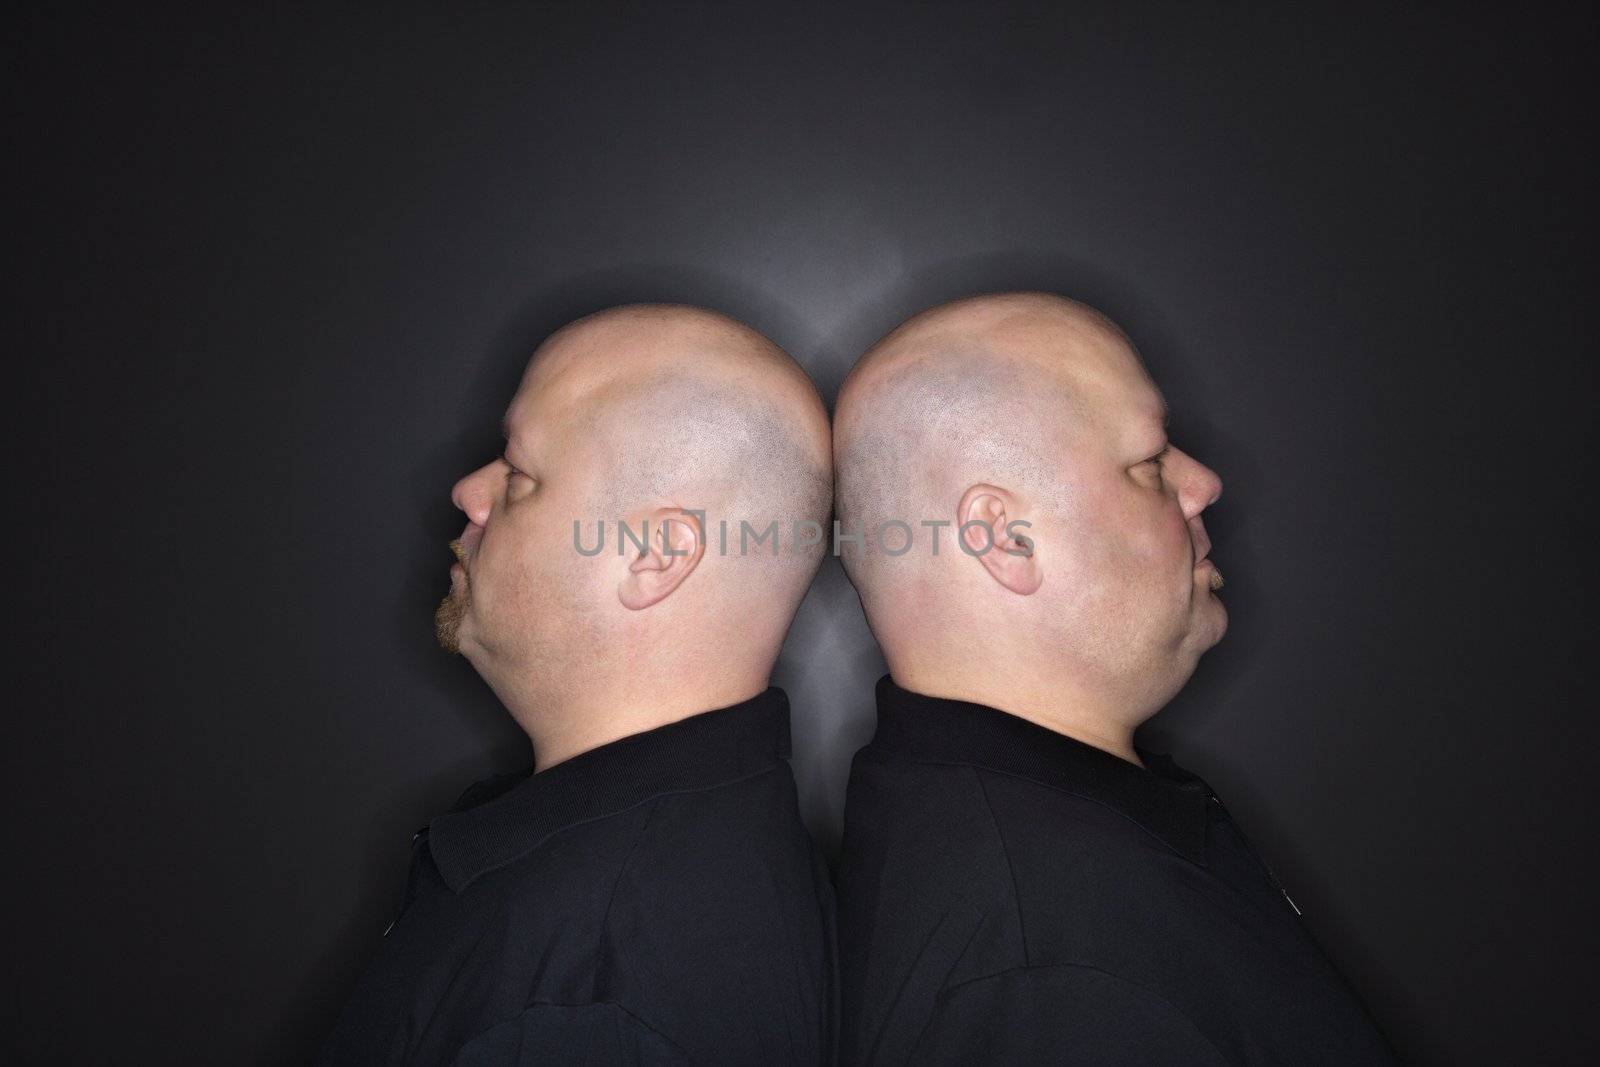 Caucasian mid adult identical twin bald men standing back to back.